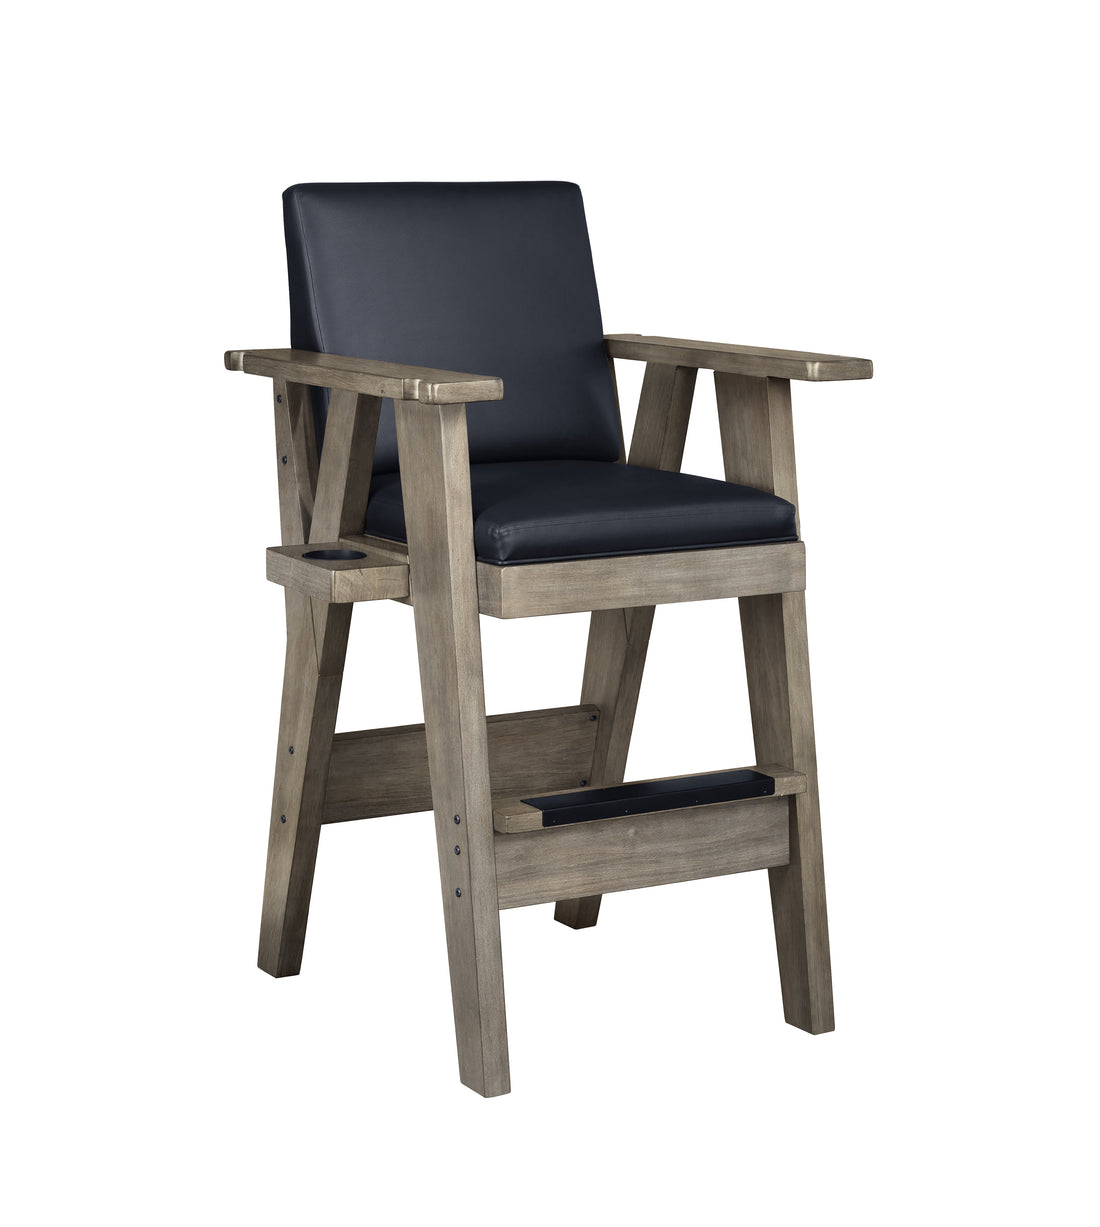 Legacy Billiards Sterling Spectator Chair in Overcast Finish - Primary Image